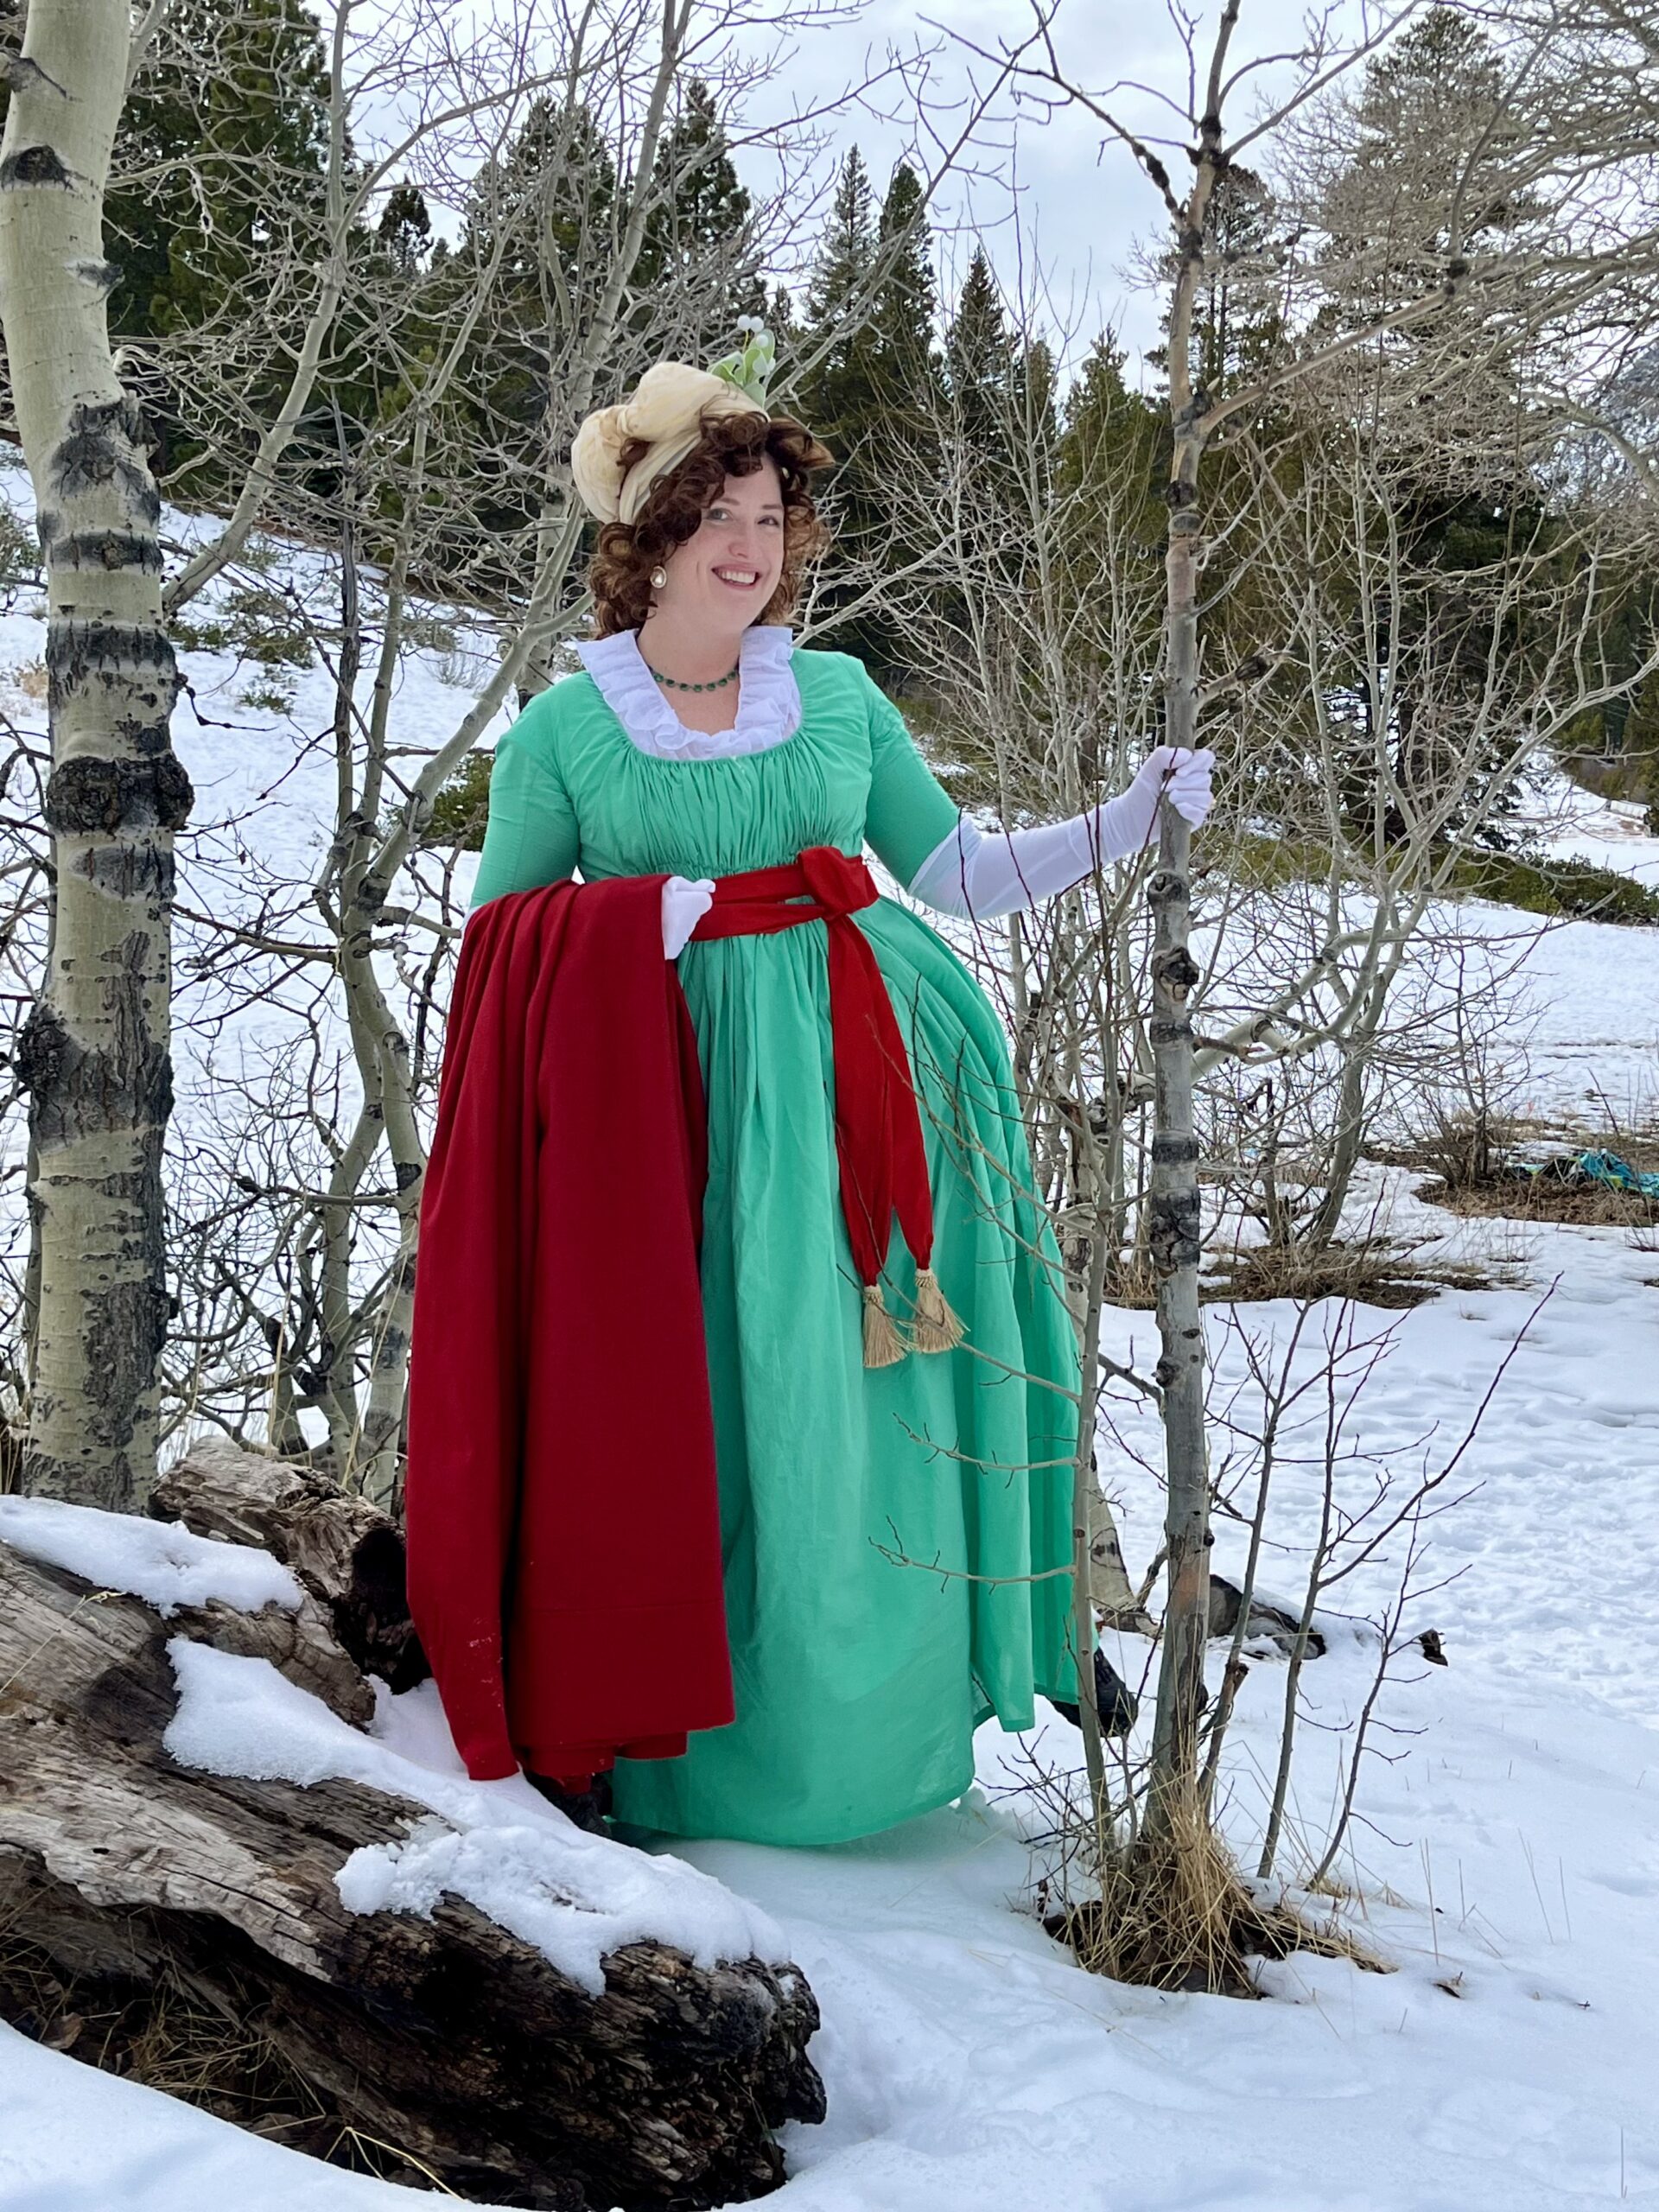 Tabubilgirl stands in a snowfield wearing a green 1790s round gown and a white chemisette and gloves. She carries a red cardinal cloak over her arm